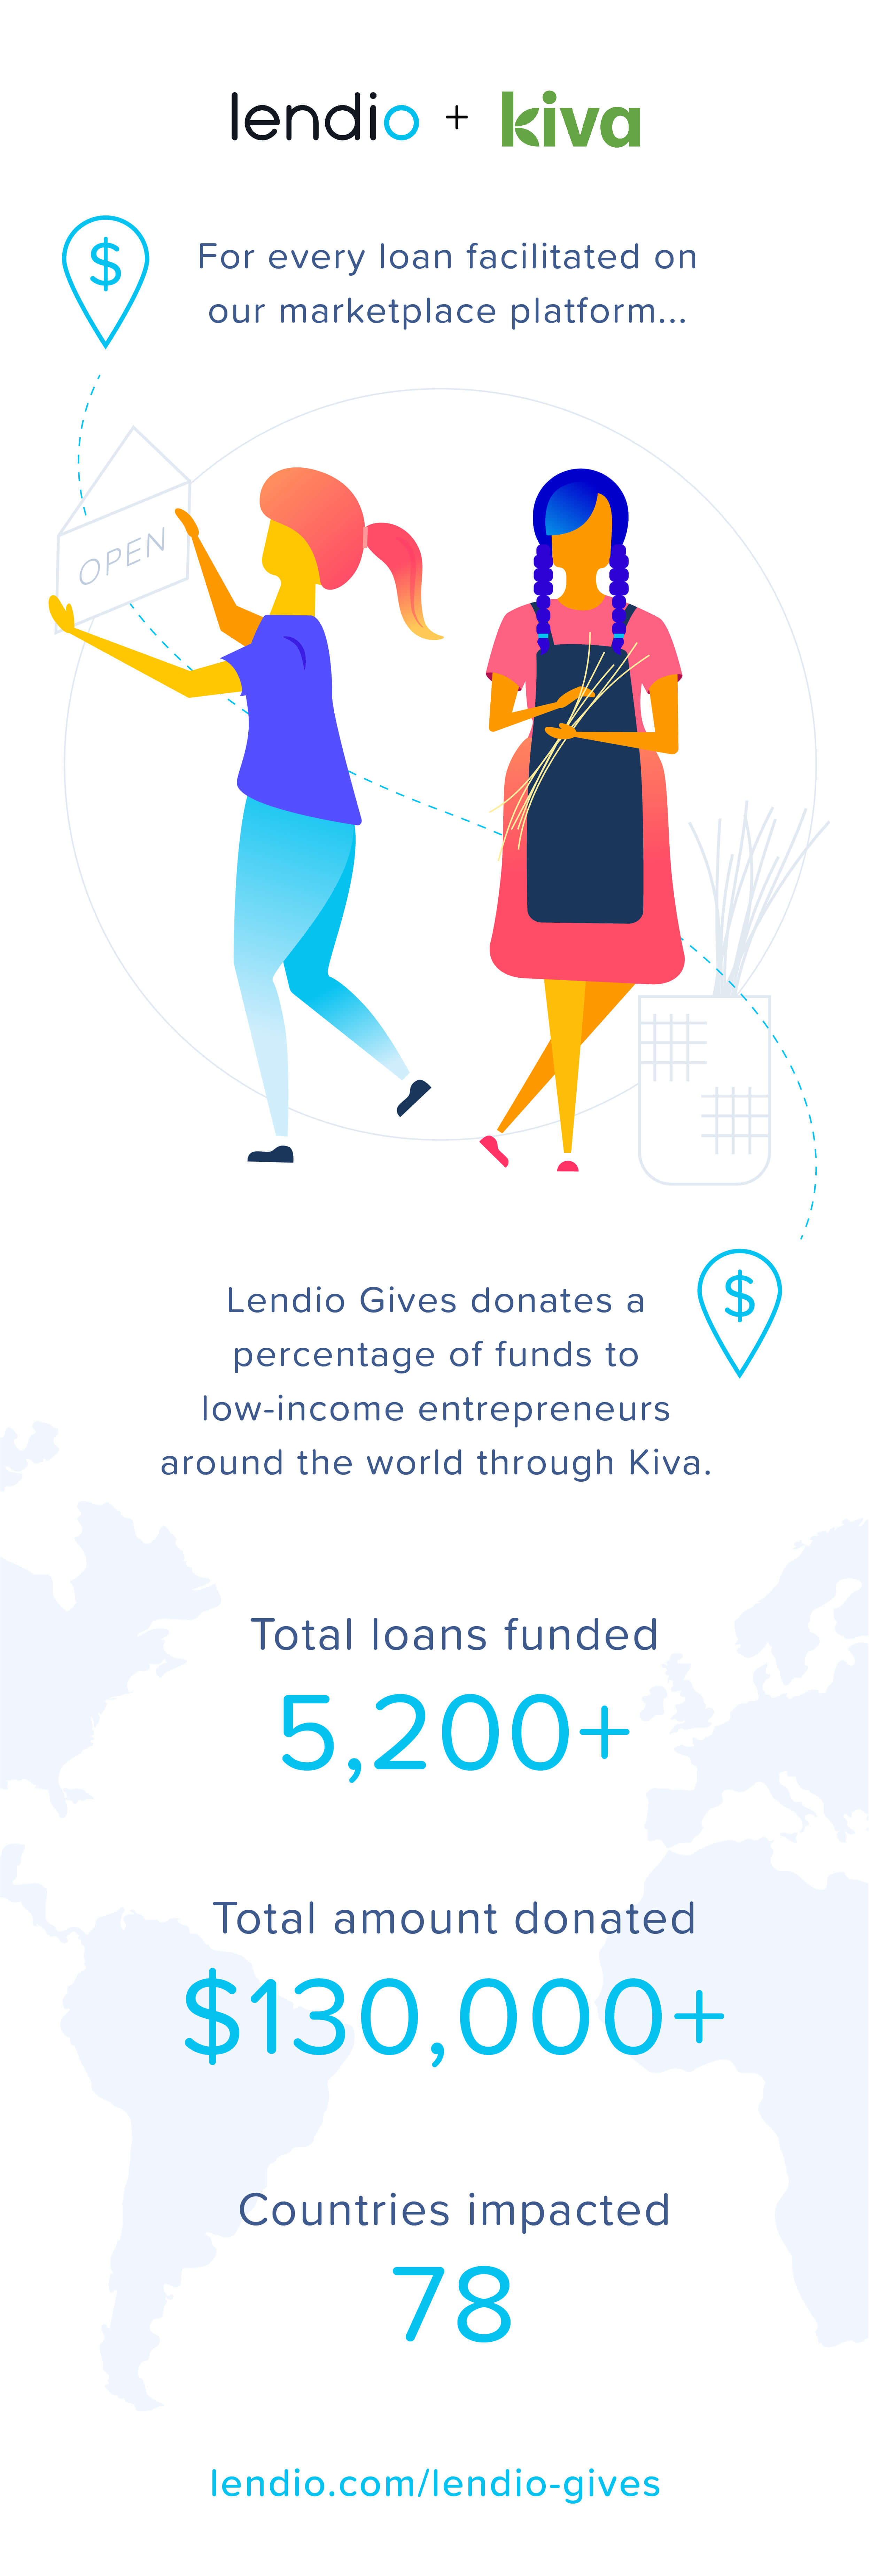 Lendio Provides More Than 5,000 Kiva Loans to Support Women-Owned Businesses Around the World